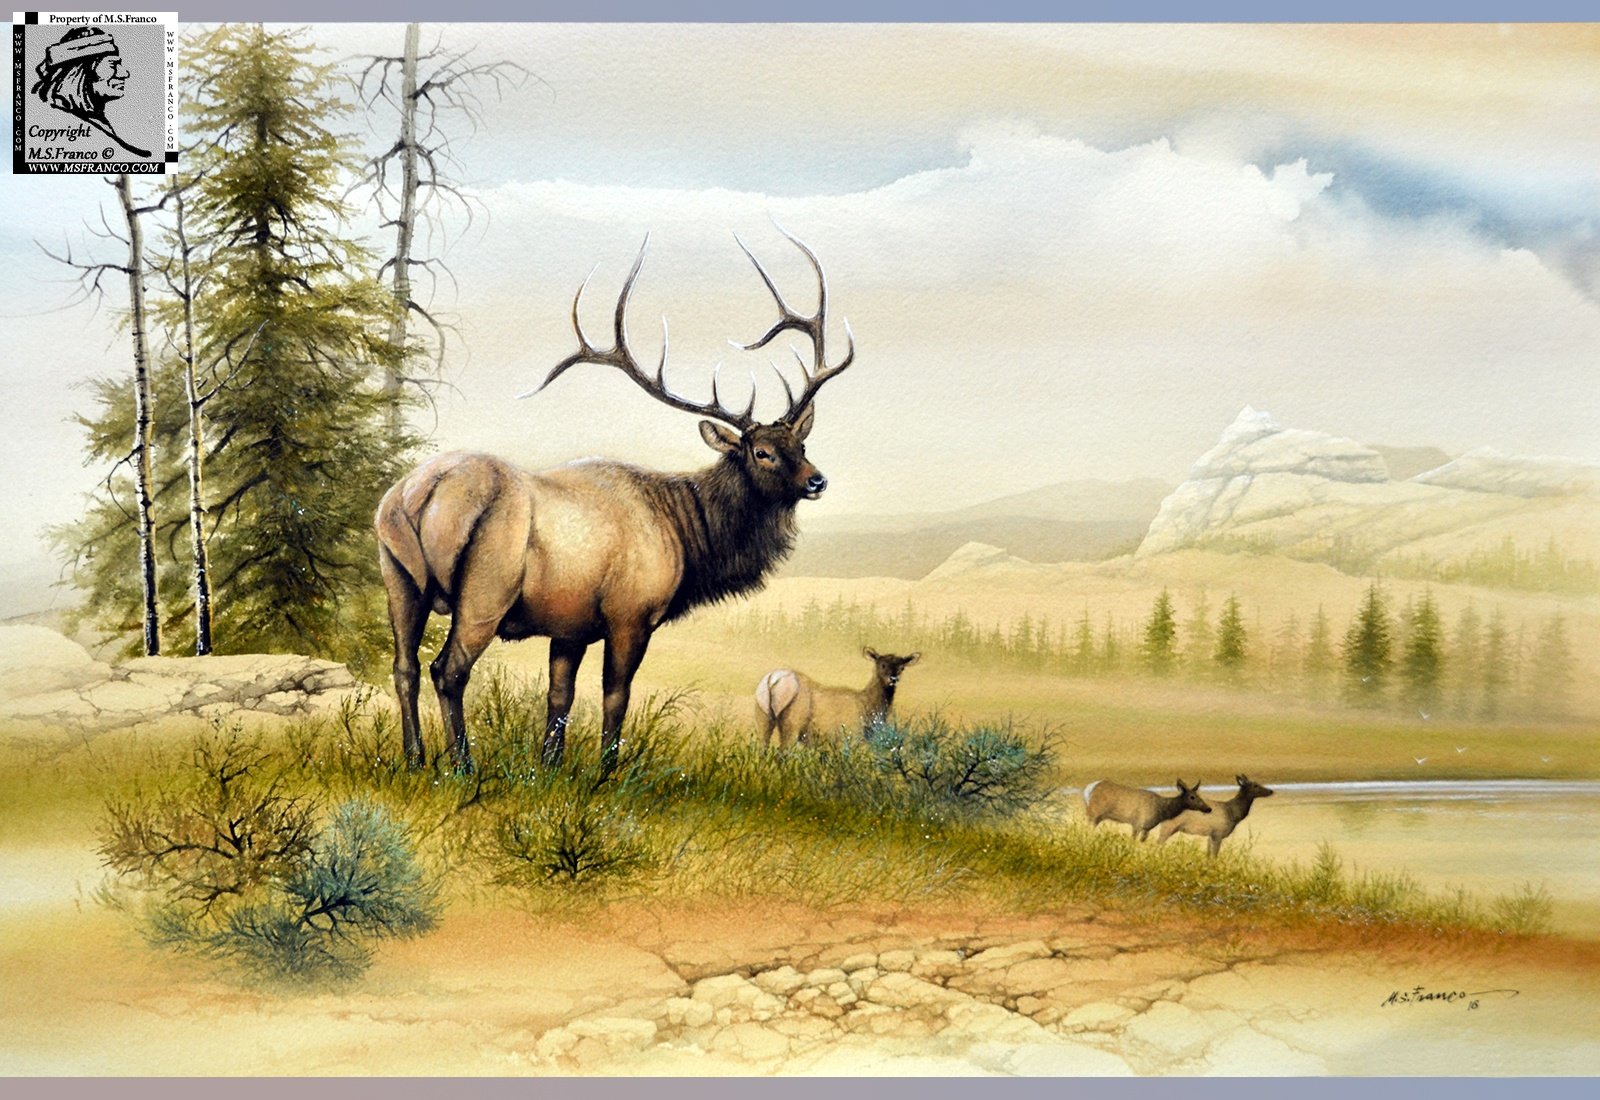 " Elk at the High Country "